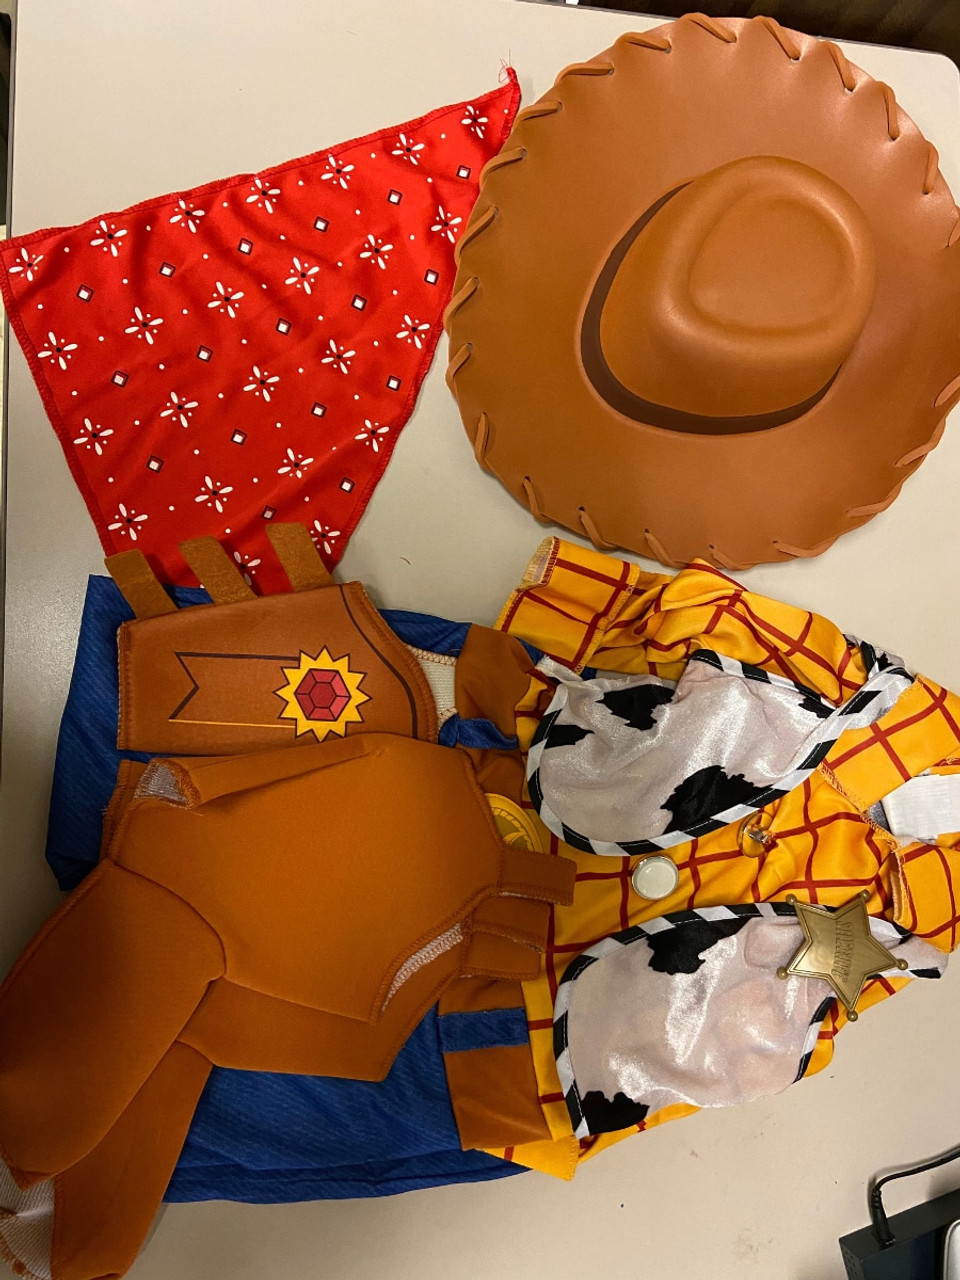 Toddler Toy Story Woody Deluxe Costume